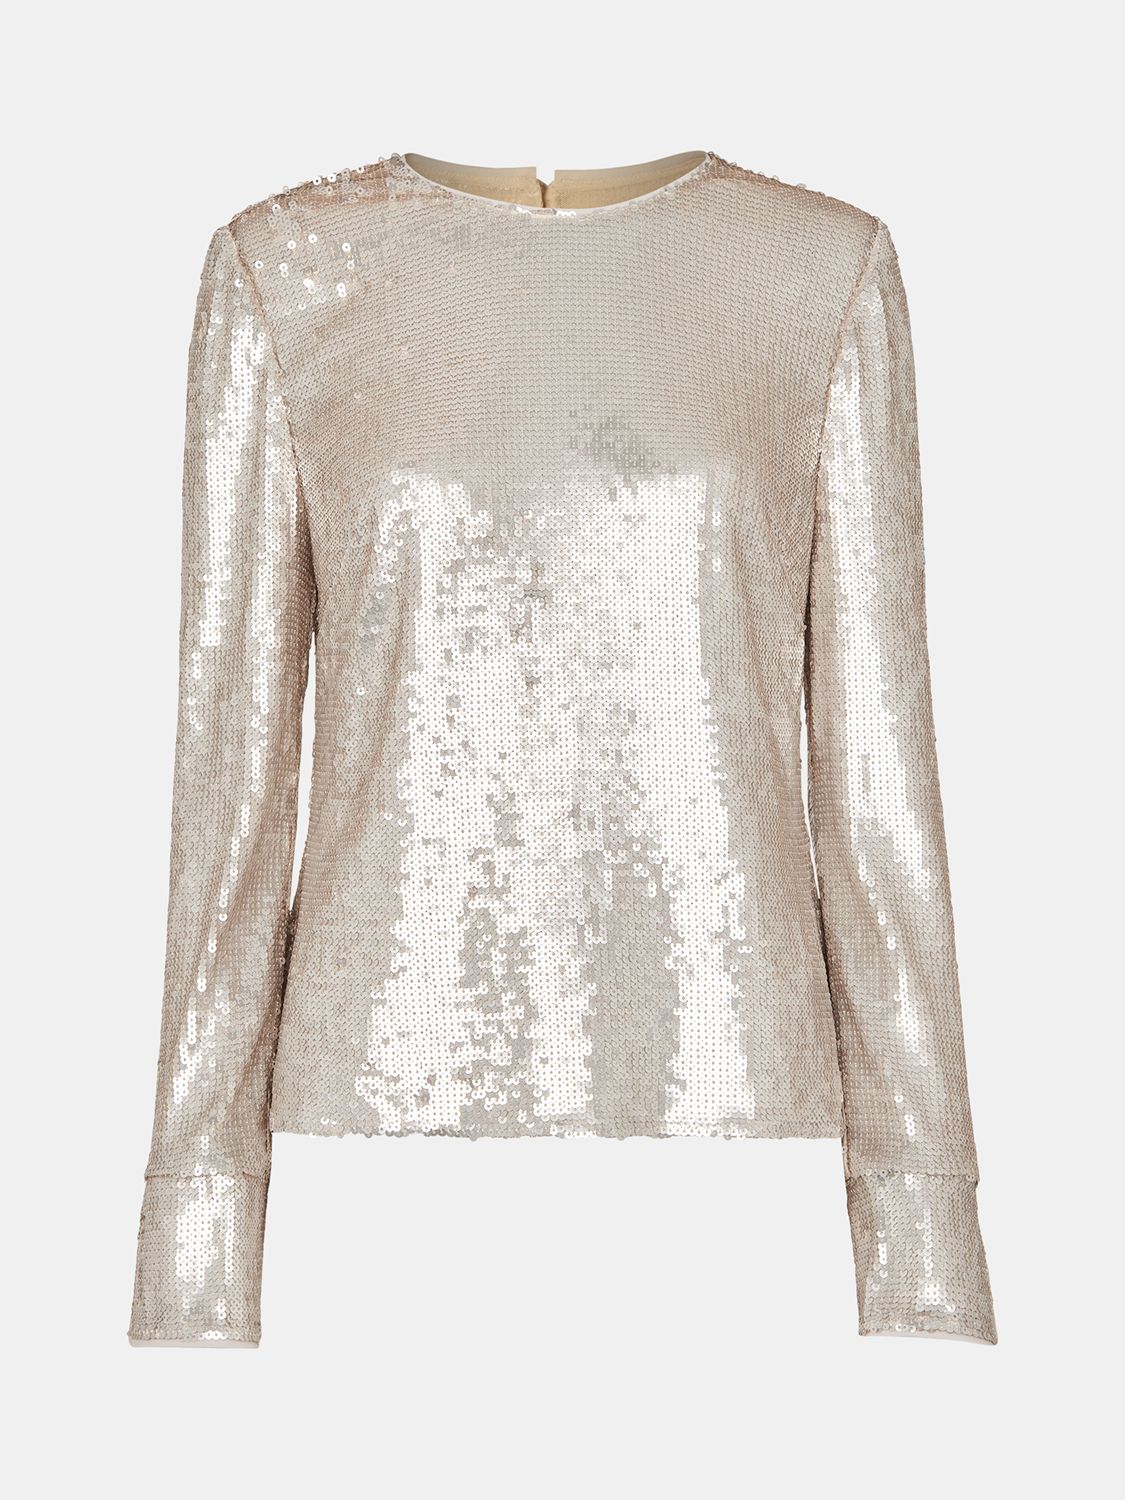 Whistles Minimal Sequin Top, Silver, 8